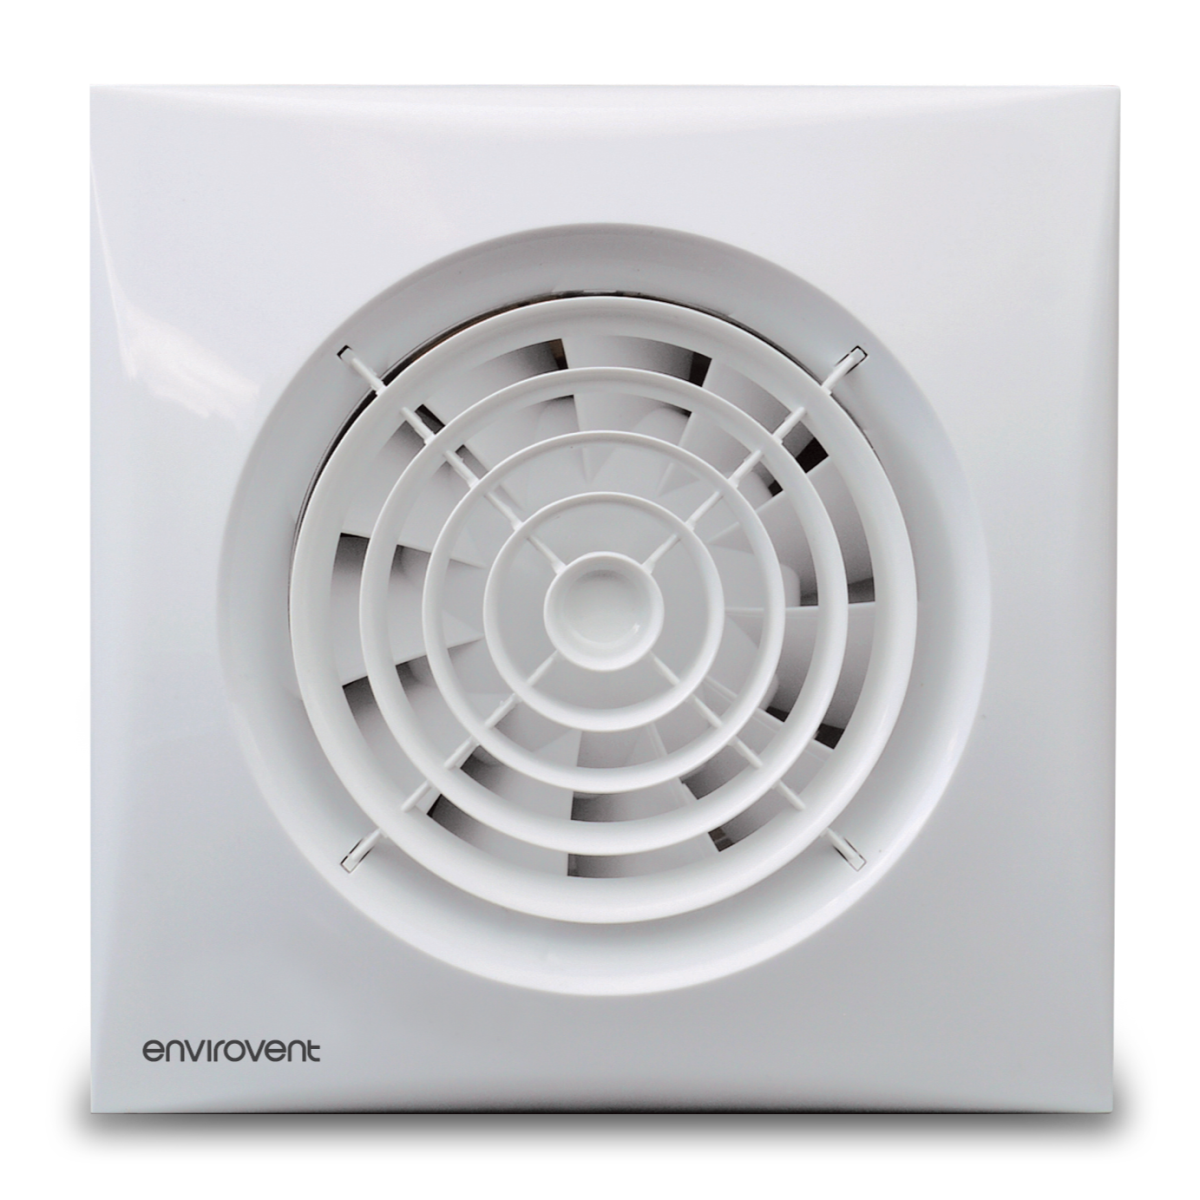 Image of an envirovent sil100t white extractor fan on a white background